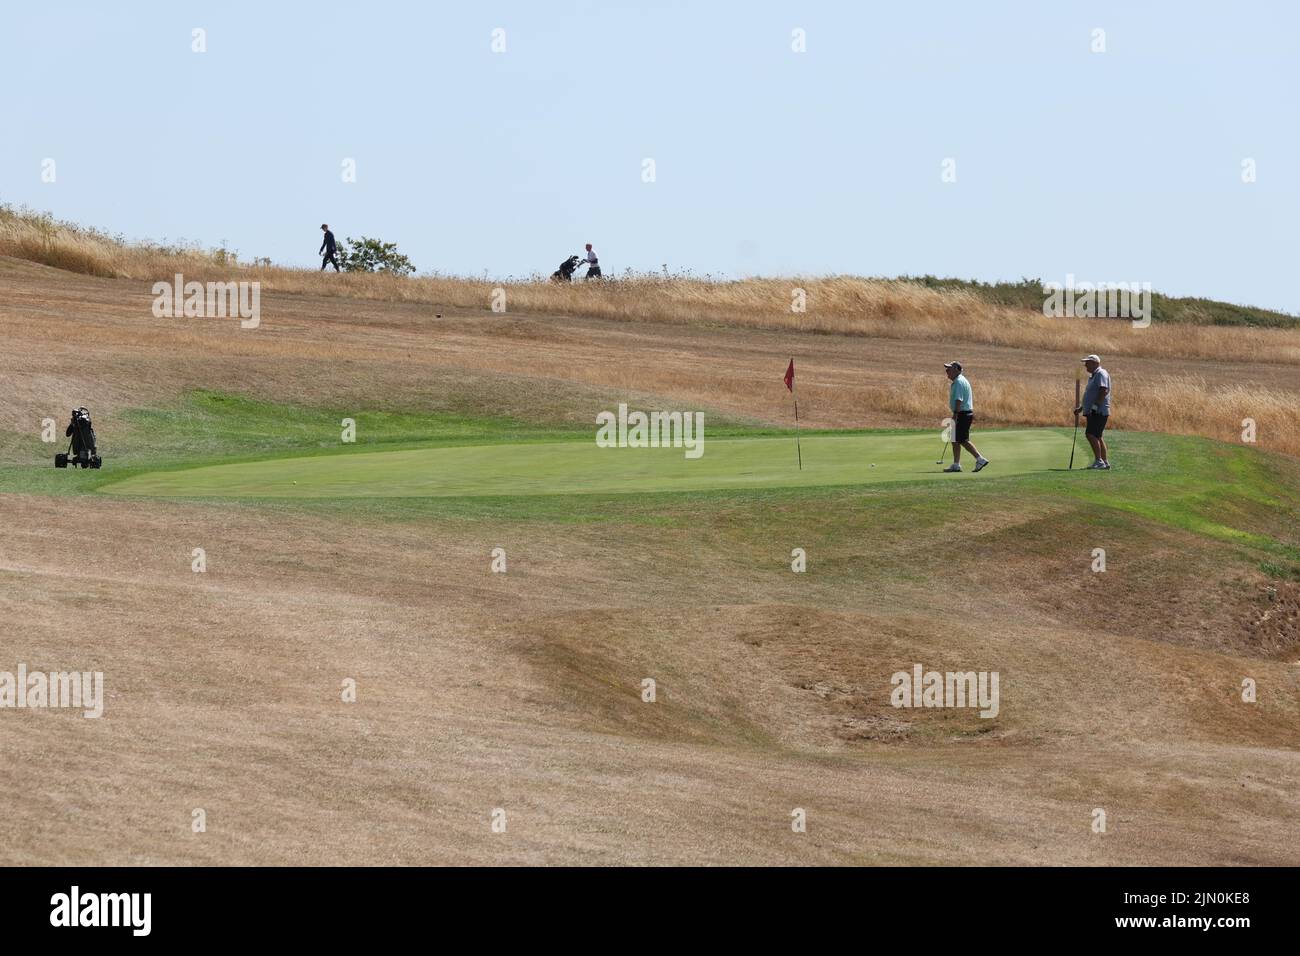 Brighton, UK. 8th Aug, 2022. Golfers putting on a lush green surrounded by scorched fairways as the temperatures continue to soar and hosepipe bans come into force around the country. Credit: James Boardman/Alamy Live News Stock Photo